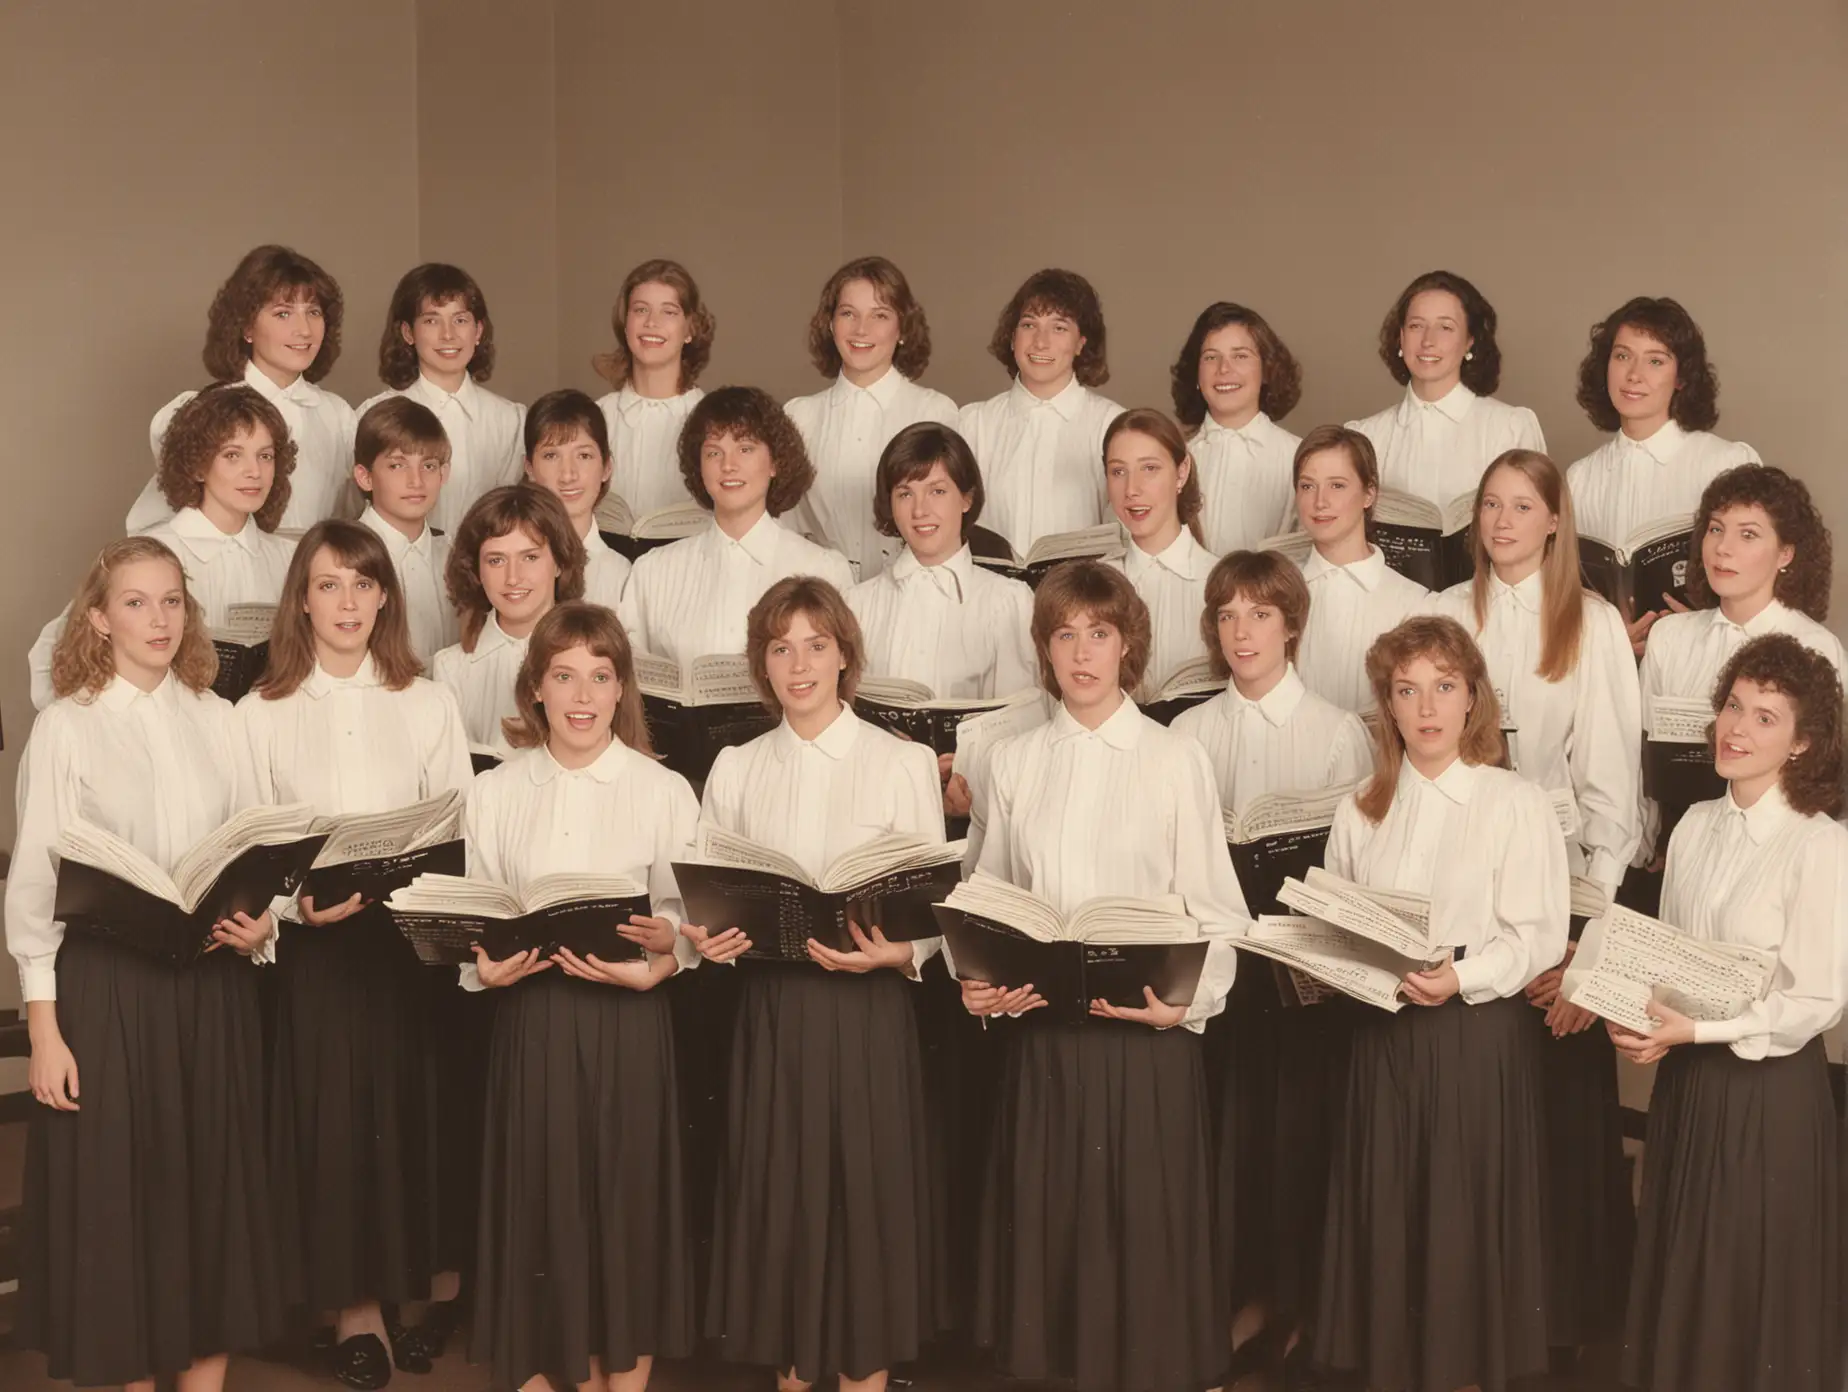 vintage 1980s choir photos standing with sheet music stands mid performance
